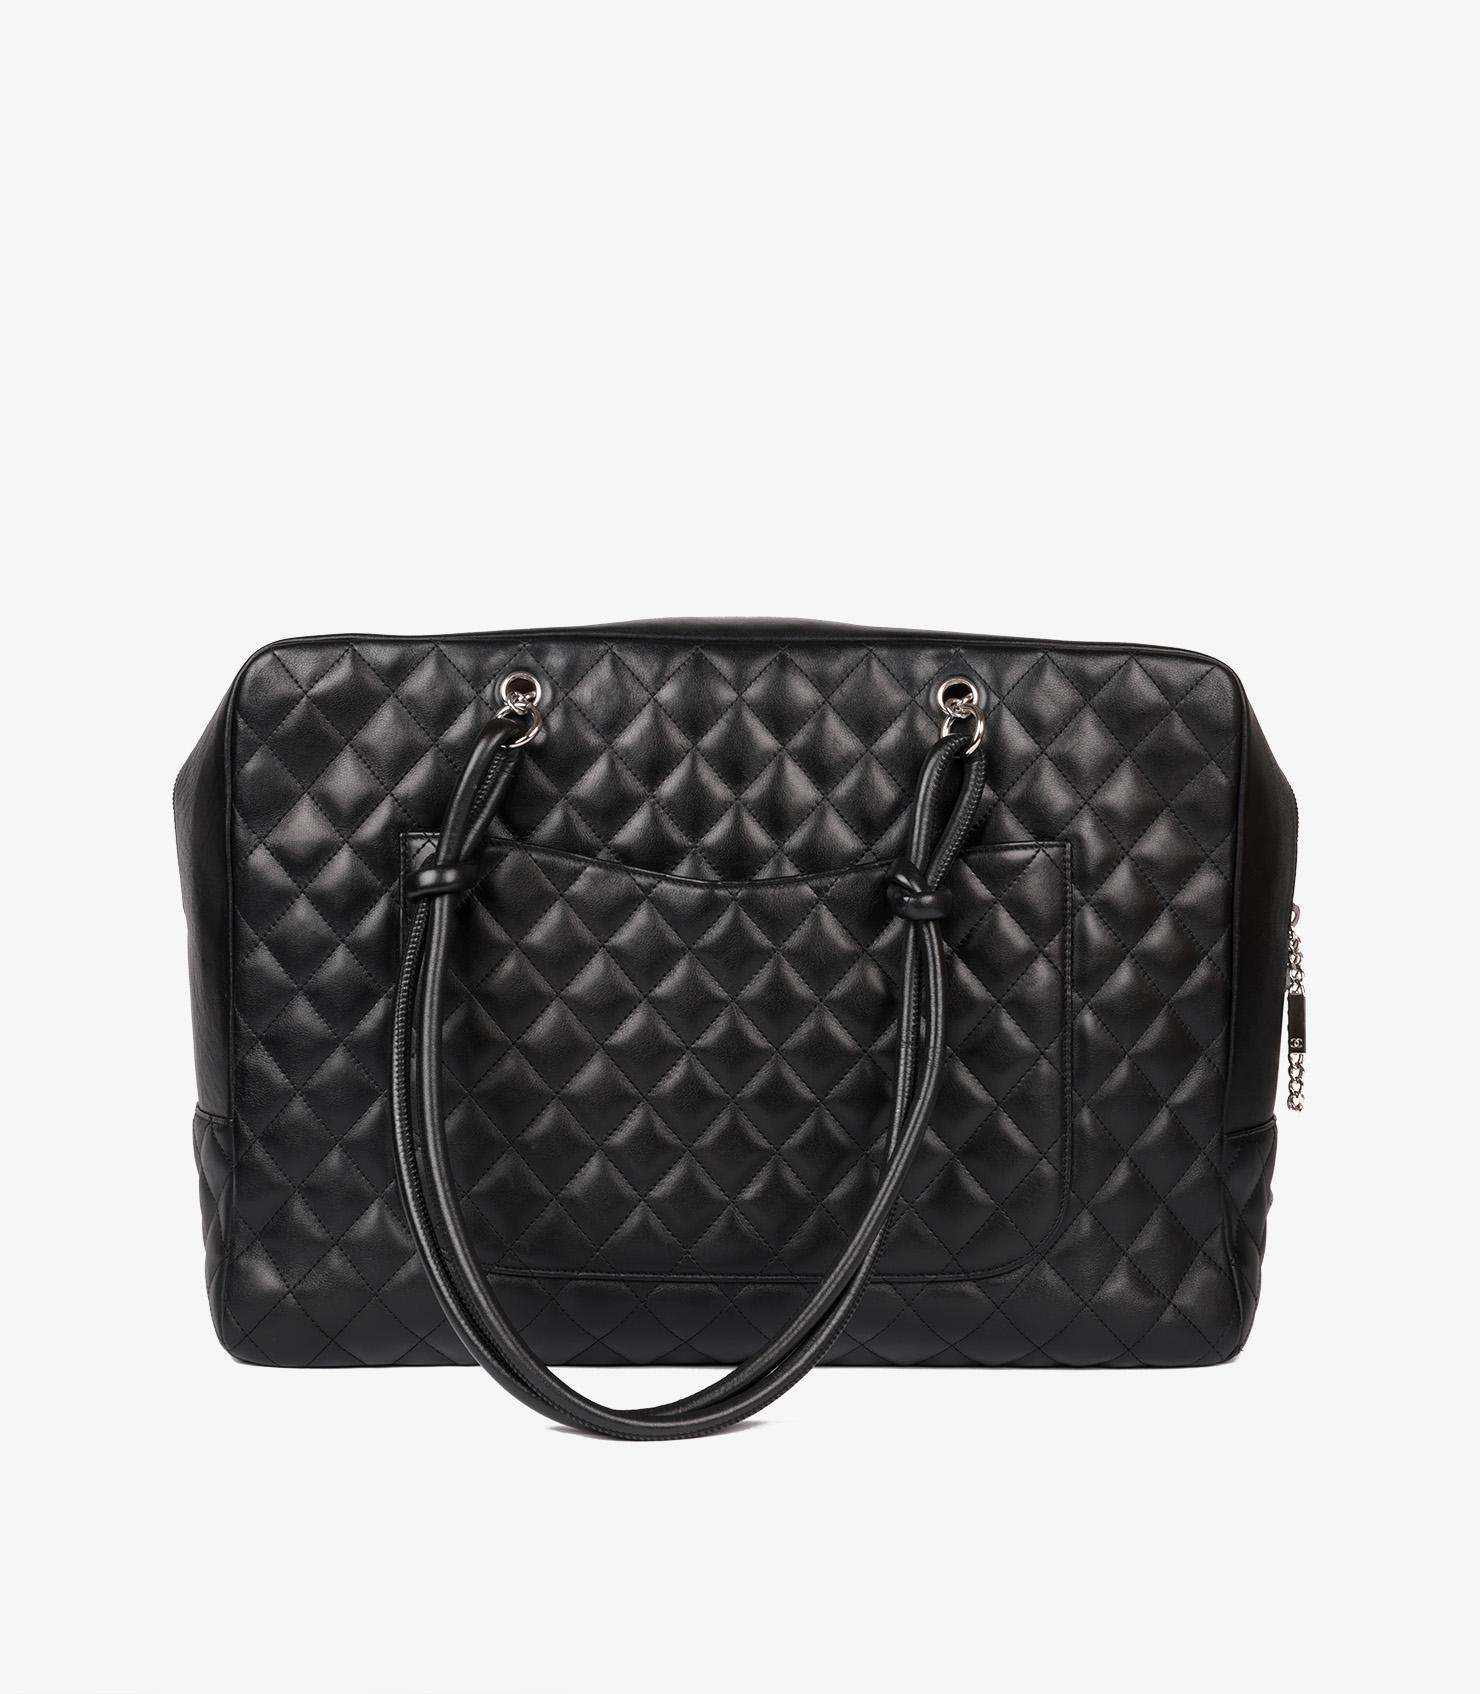 Chanel Black Quilted & Grey Smooth Calfskin Leather Vintage Cambon Shoulder Tote For Sale 2